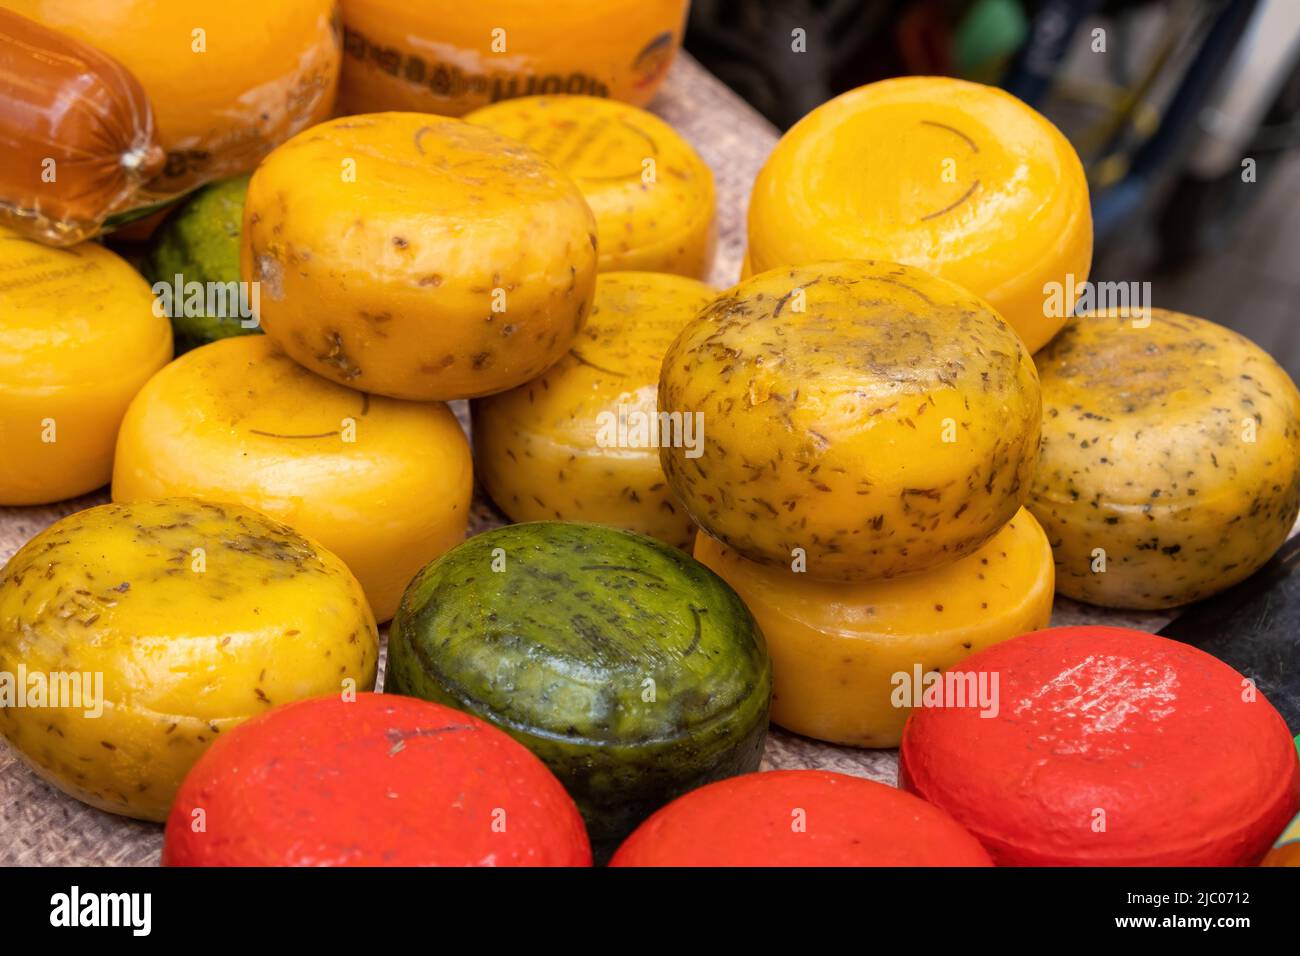 Dutch cheese store. Edam, Gouda whole round wheels for sale on an open air retail stall in Netherlands, close up view Stock Photo